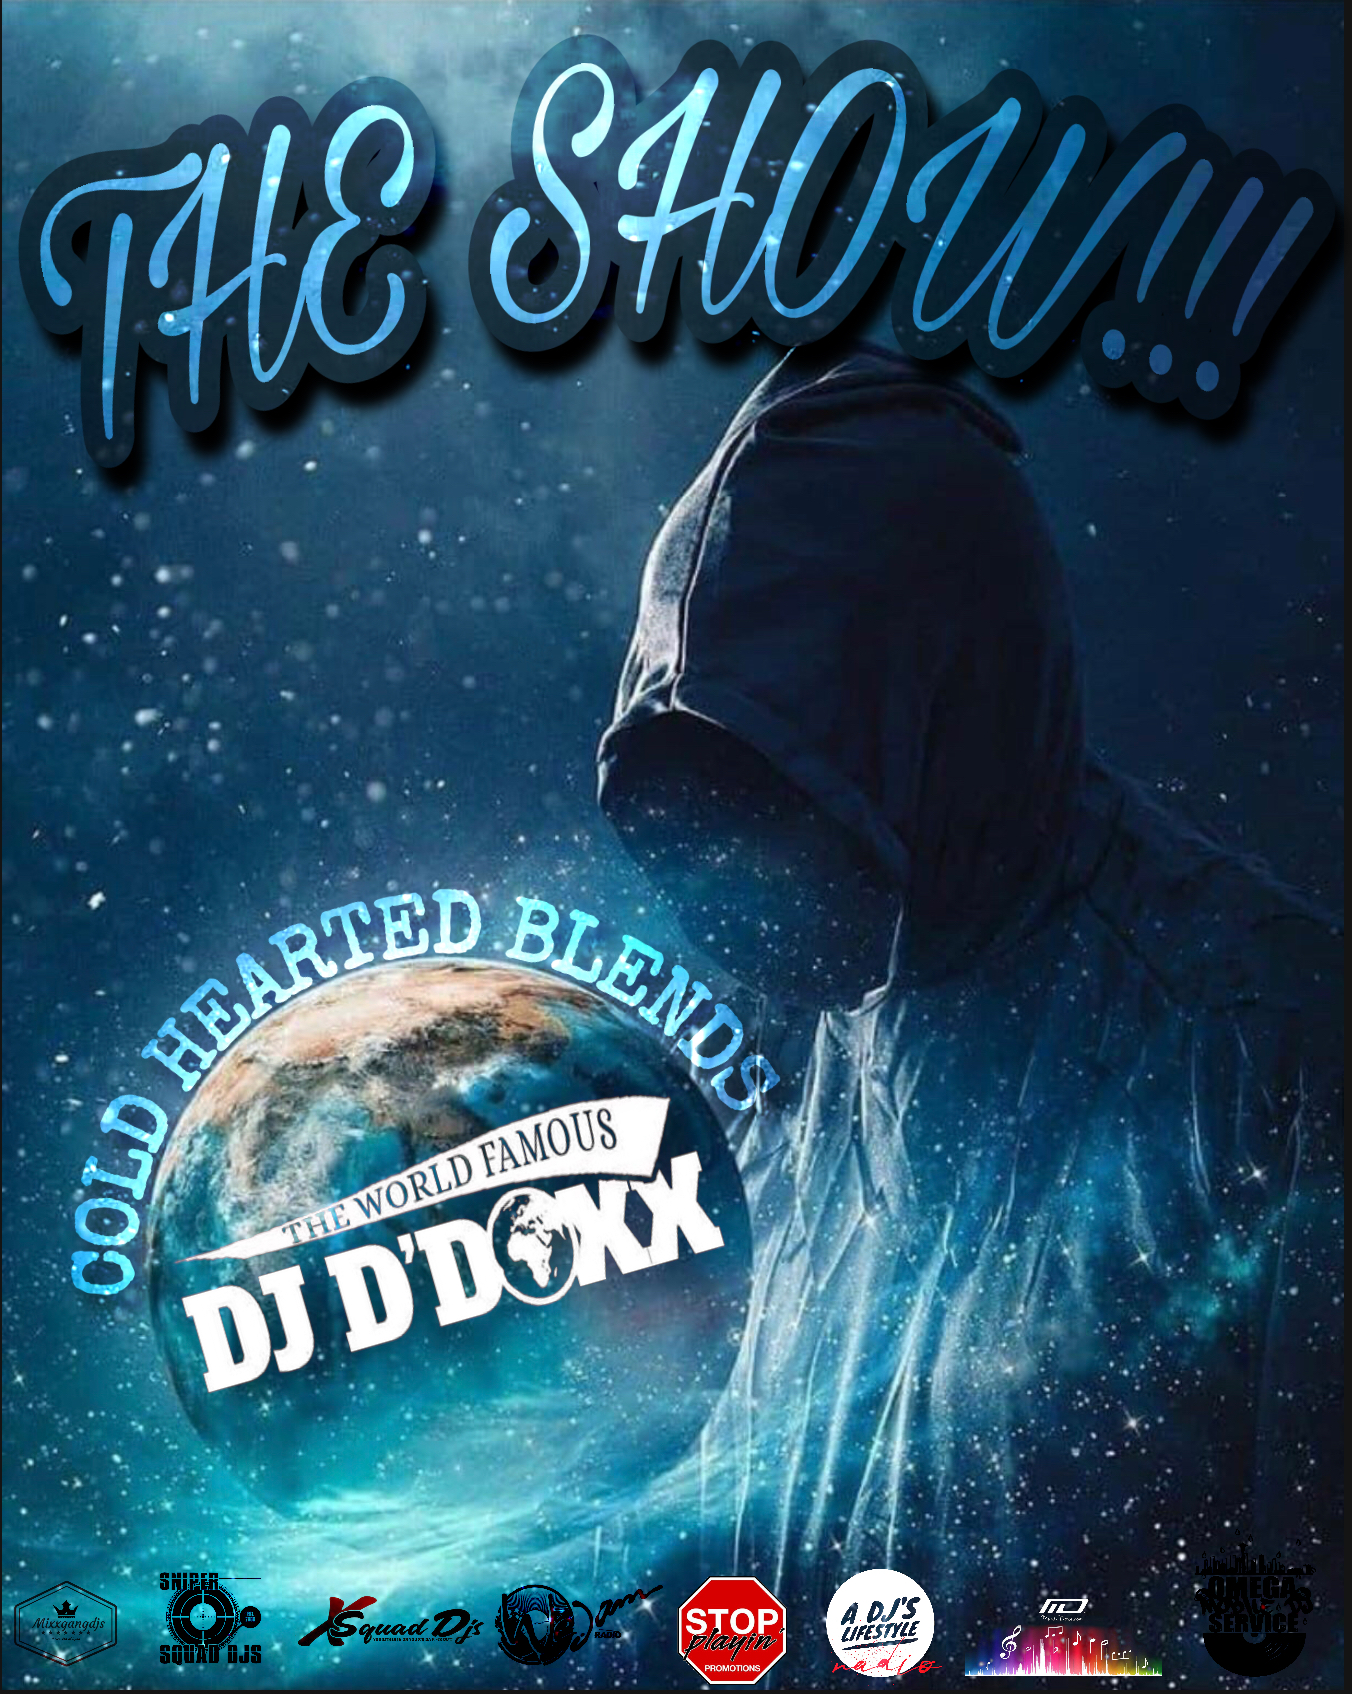 Art for The Show!!! by The World Fsmous Dj-D'Doxx